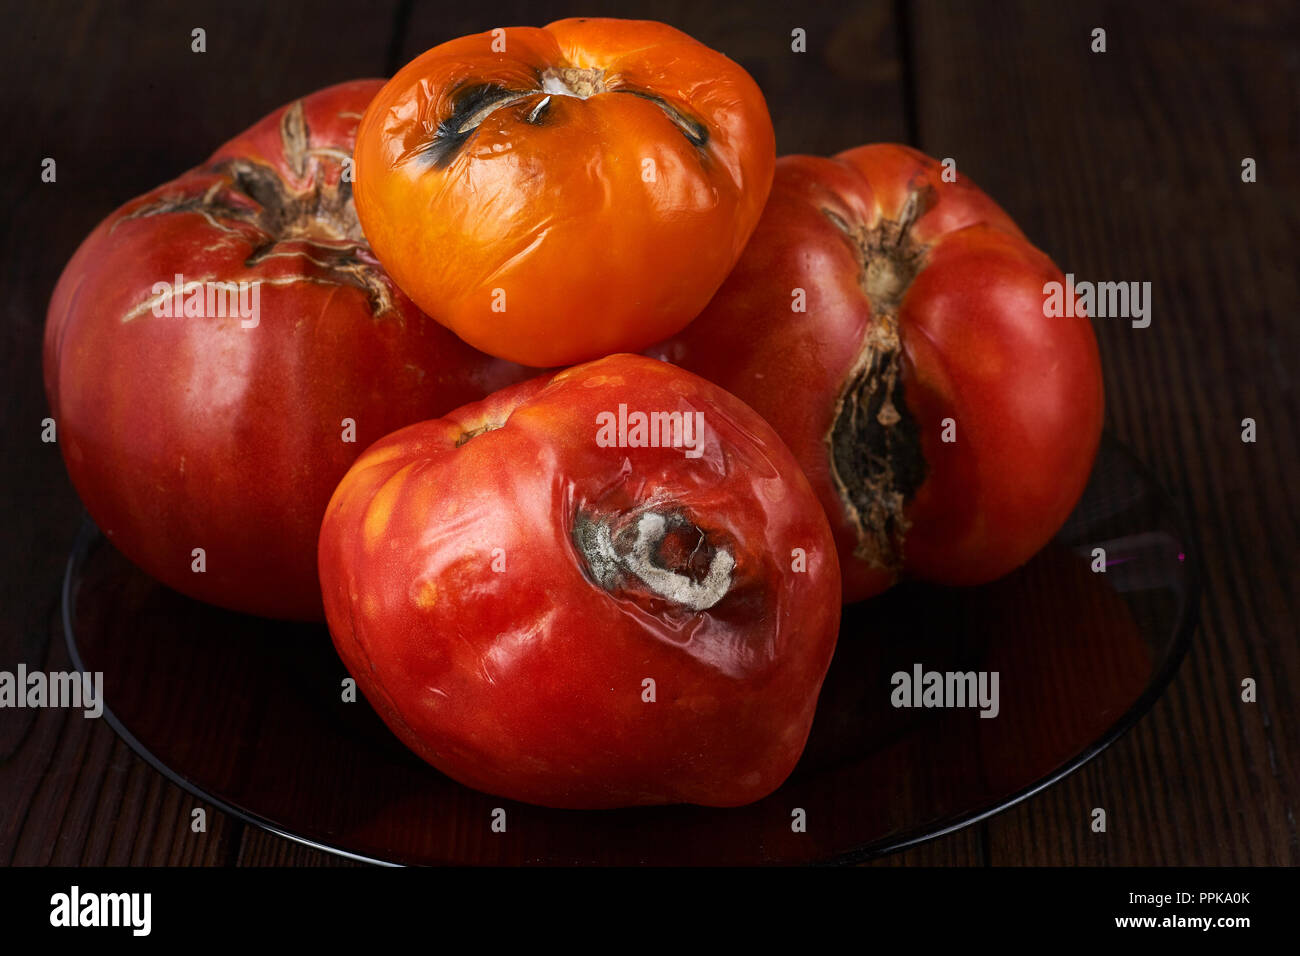 Spoiled, rotten three tomatoes on a dark wooden background. Stock Photo